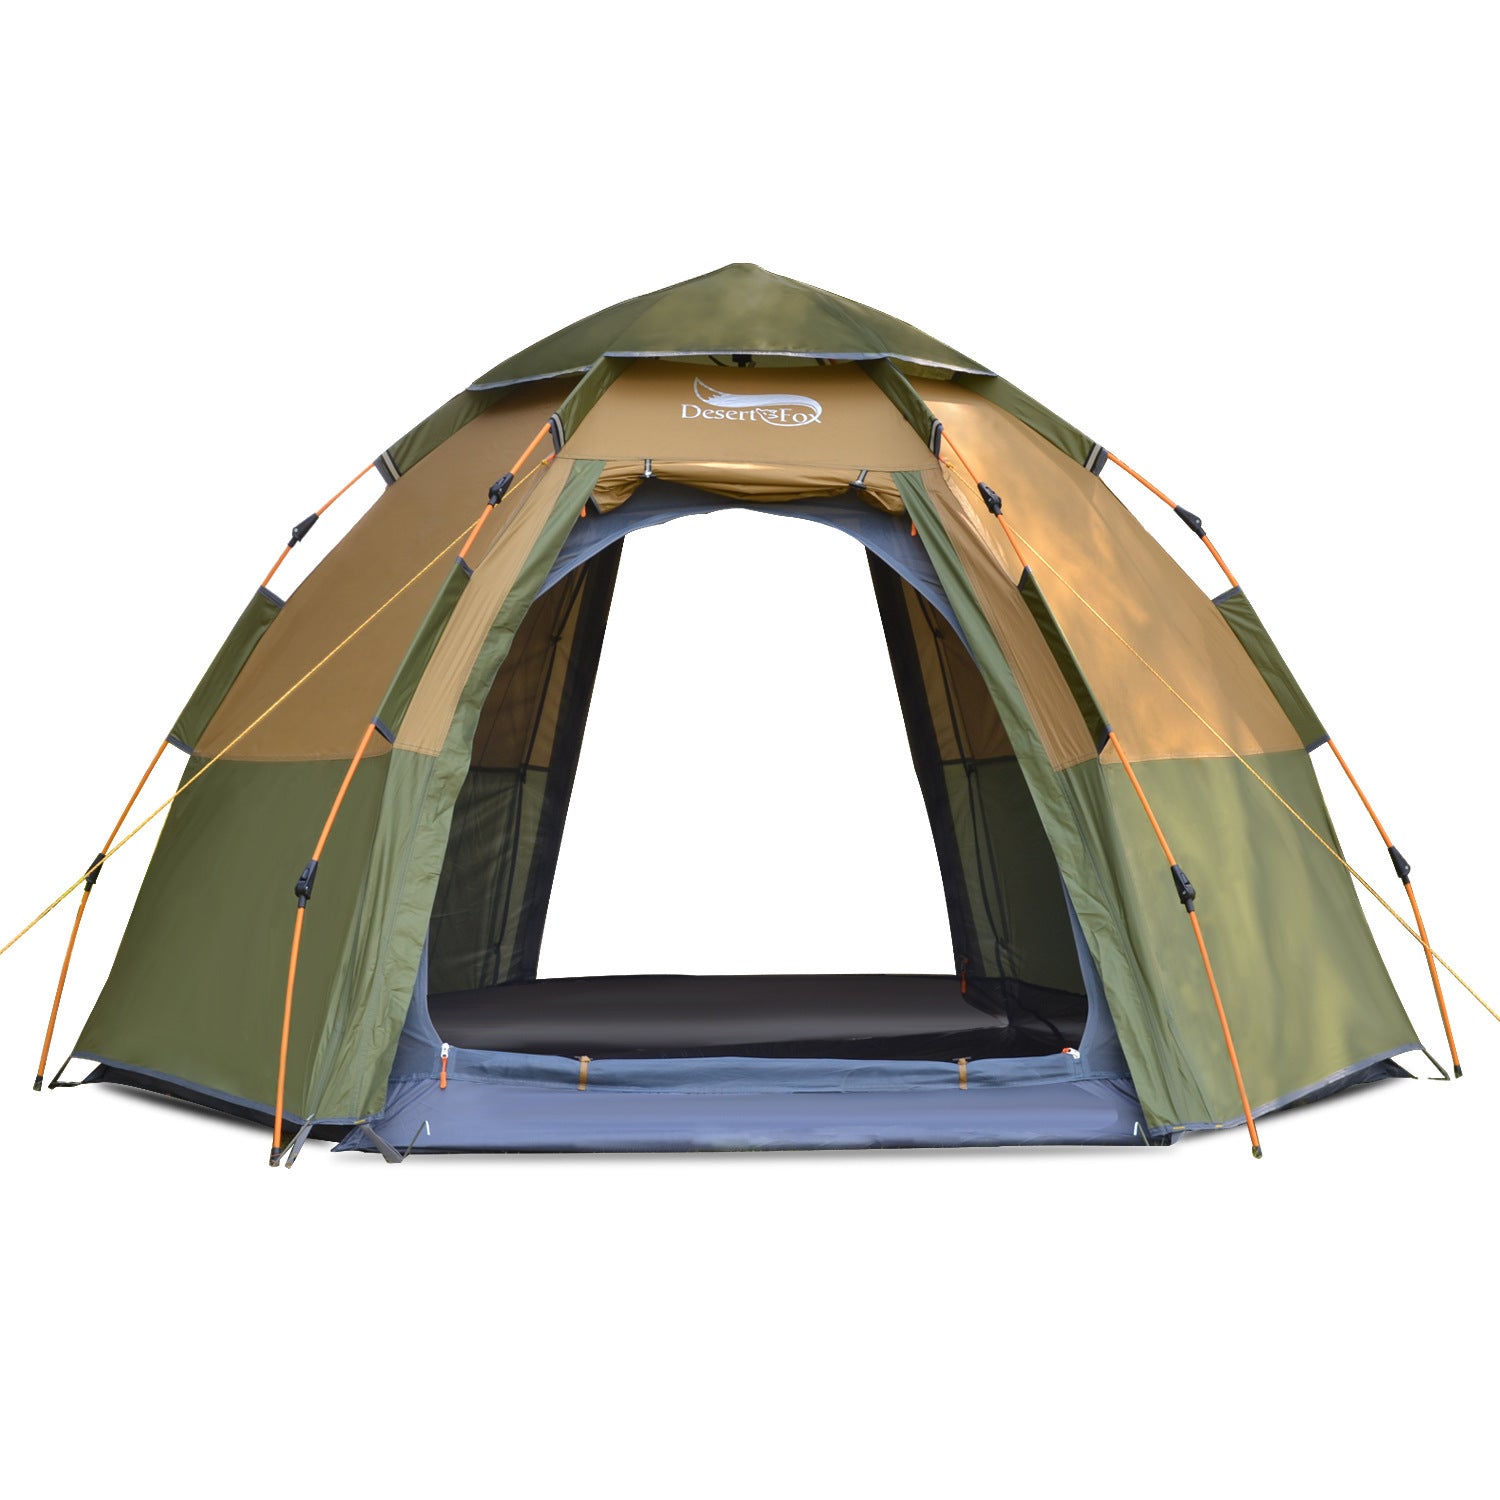 Automatic Hexagonal Tent Multi-Person Double-Layer Outdoor Camping Rain Tent